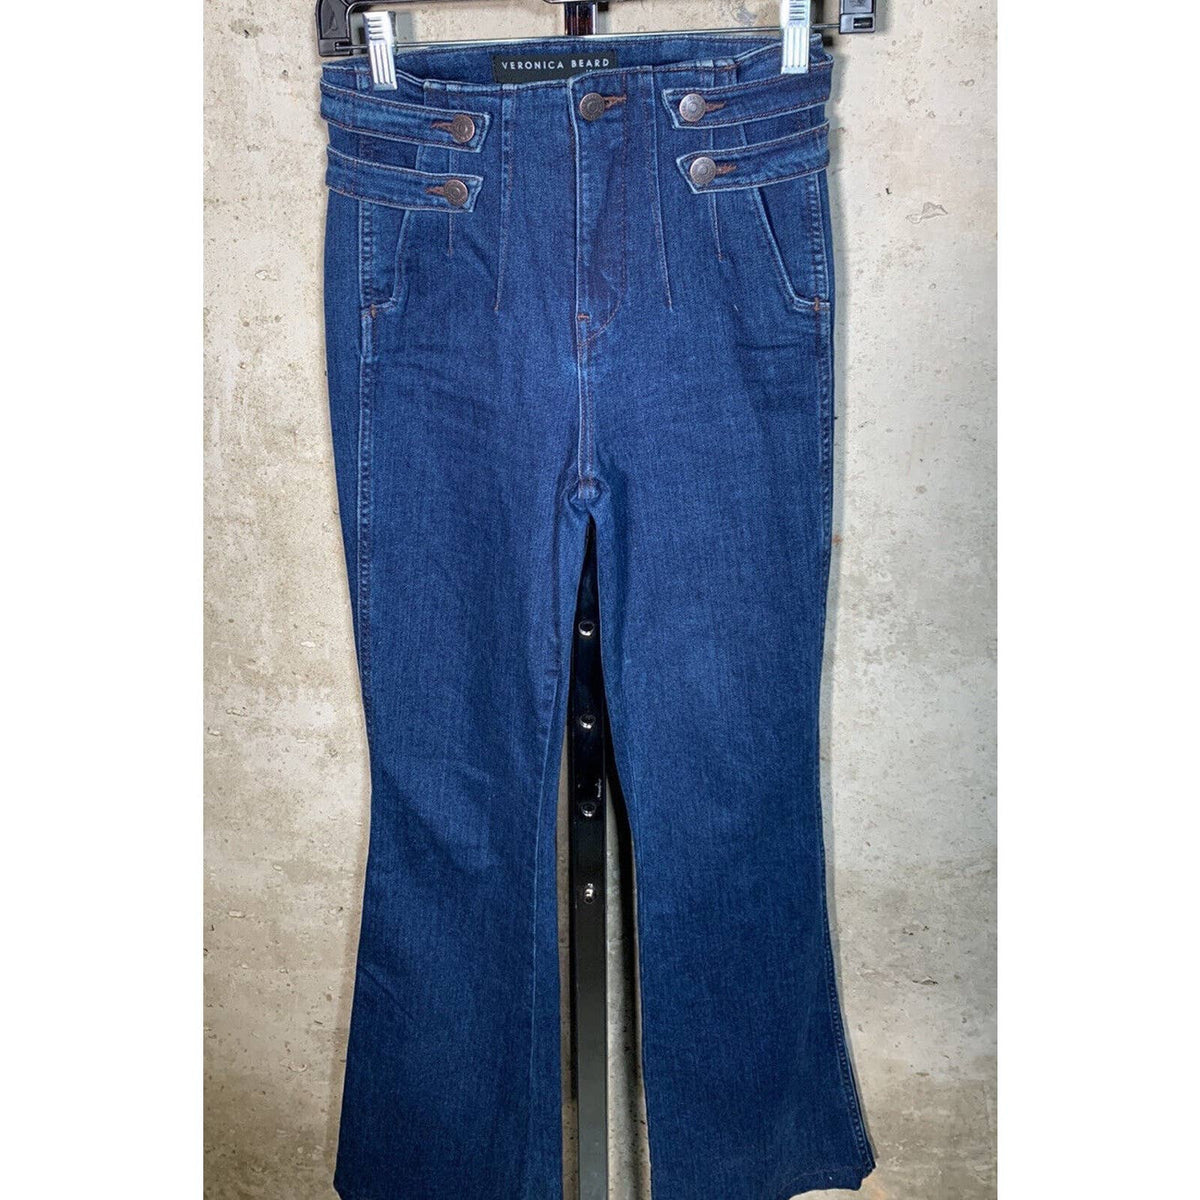 Veronica Beard Beverly Skinny Flare High Rise Washed Oxford Jeans Sz.24